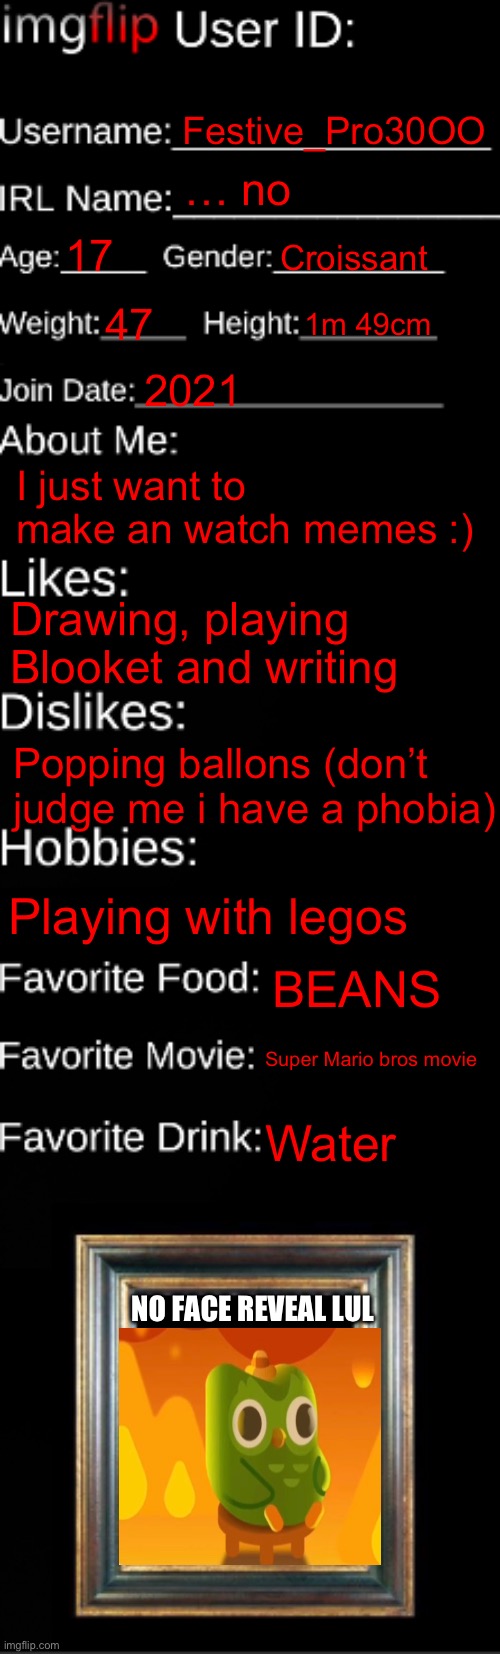 My Imgflip id card | Festive_Pro30OO; … no; 17; Croissant; 47; 1m 49cm; 2021; I just want to make an watch memes :); Drawing, playing Blooket and writing; Popping ballons (don’t judge me i have a phobia); Playing with legos; BEANS; Super Mario bros movie; Water; NO FACE REVEAL LUL | image tagged in imgflip id card | made w/ Imgflip meme maker